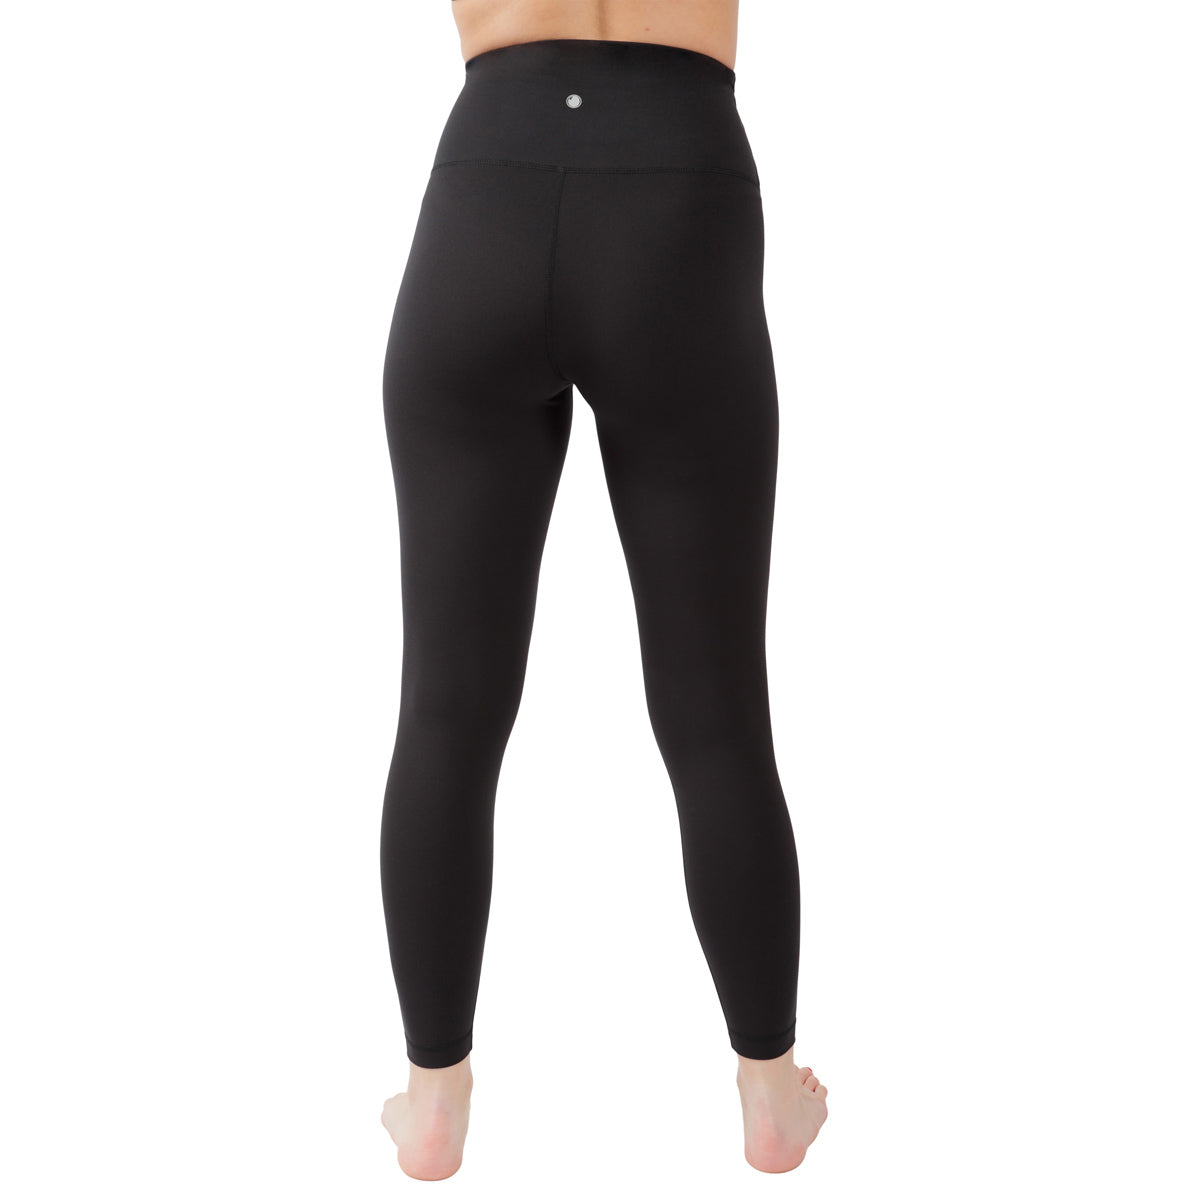 Yogalicious, Pants & Jumpsuits, Yogalicious High Waisted Buttery Soft  Yoga Active Charcoal Dark Grey Legging